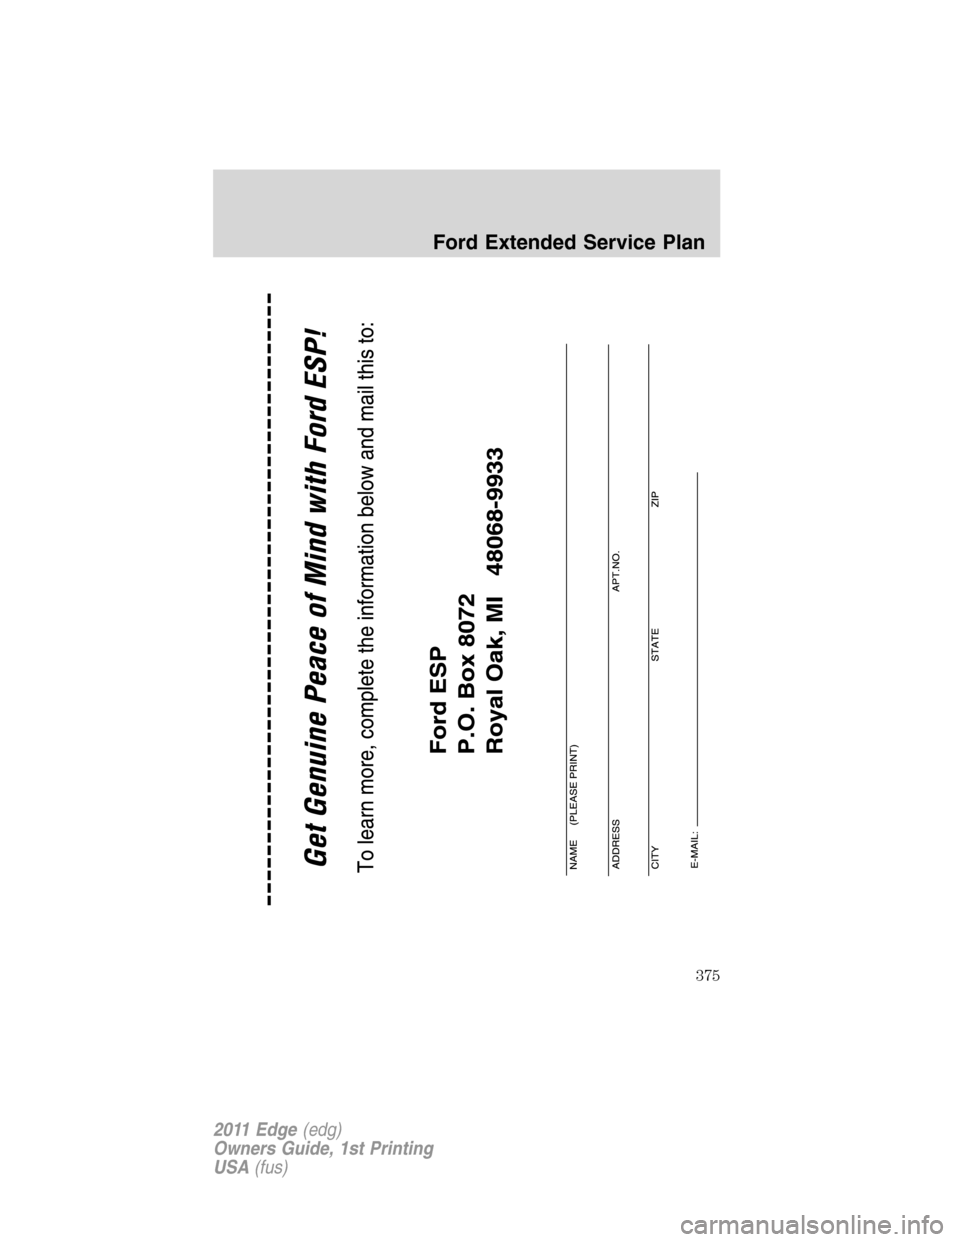 FORD EDGE 2011 1.G Owners Manual Ford Extended Service Plan
375
2011 Edge(edg)
Owners Guide, 1st Printing
USA(fus) 